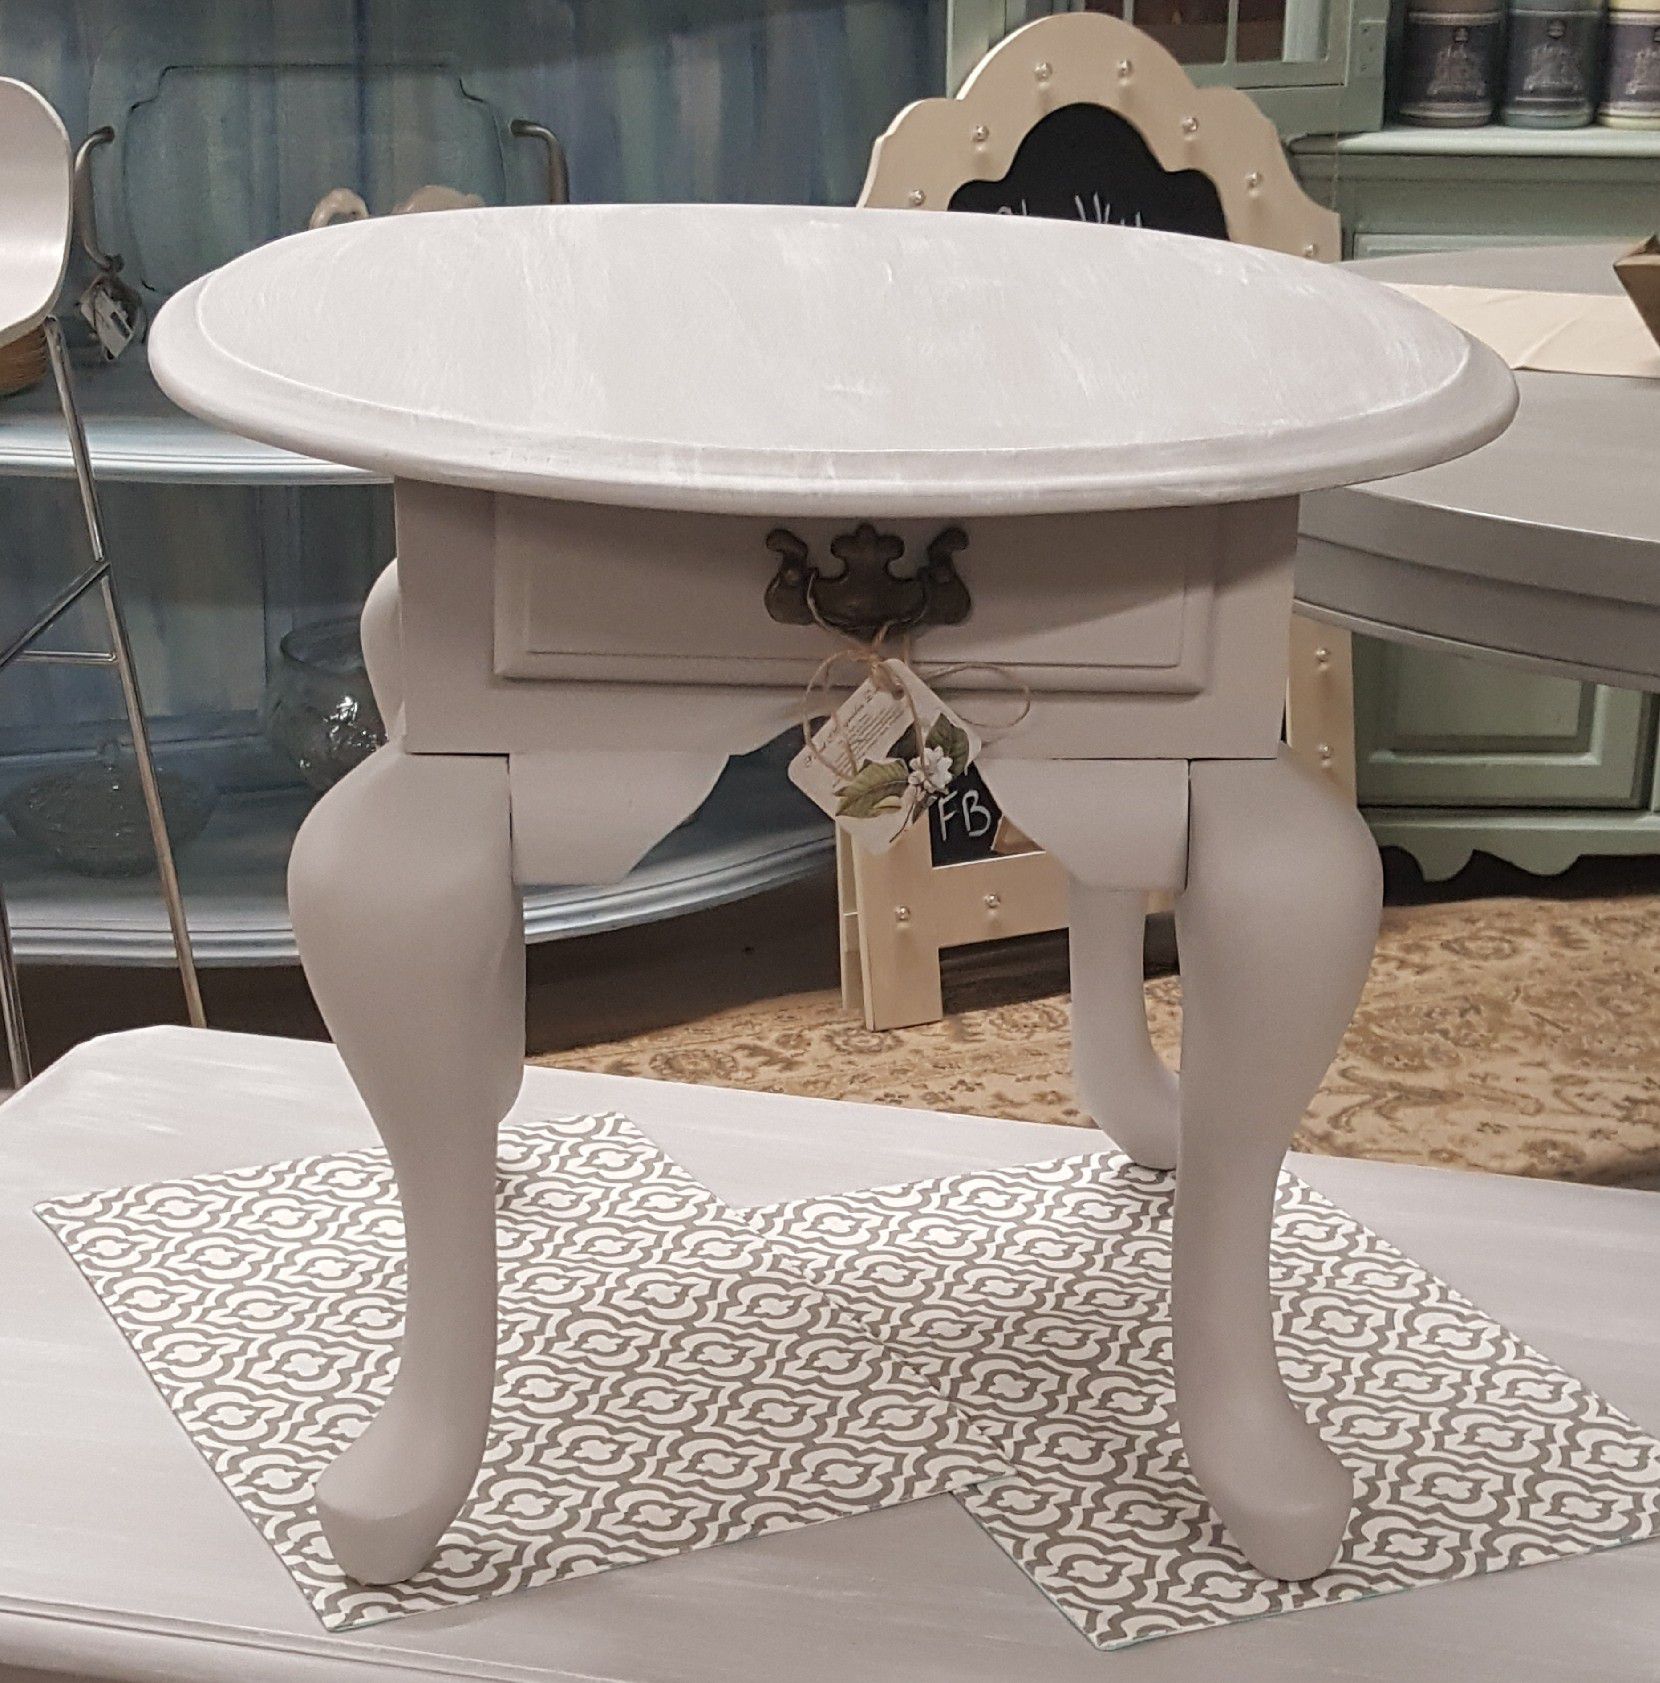 End table with white washed top